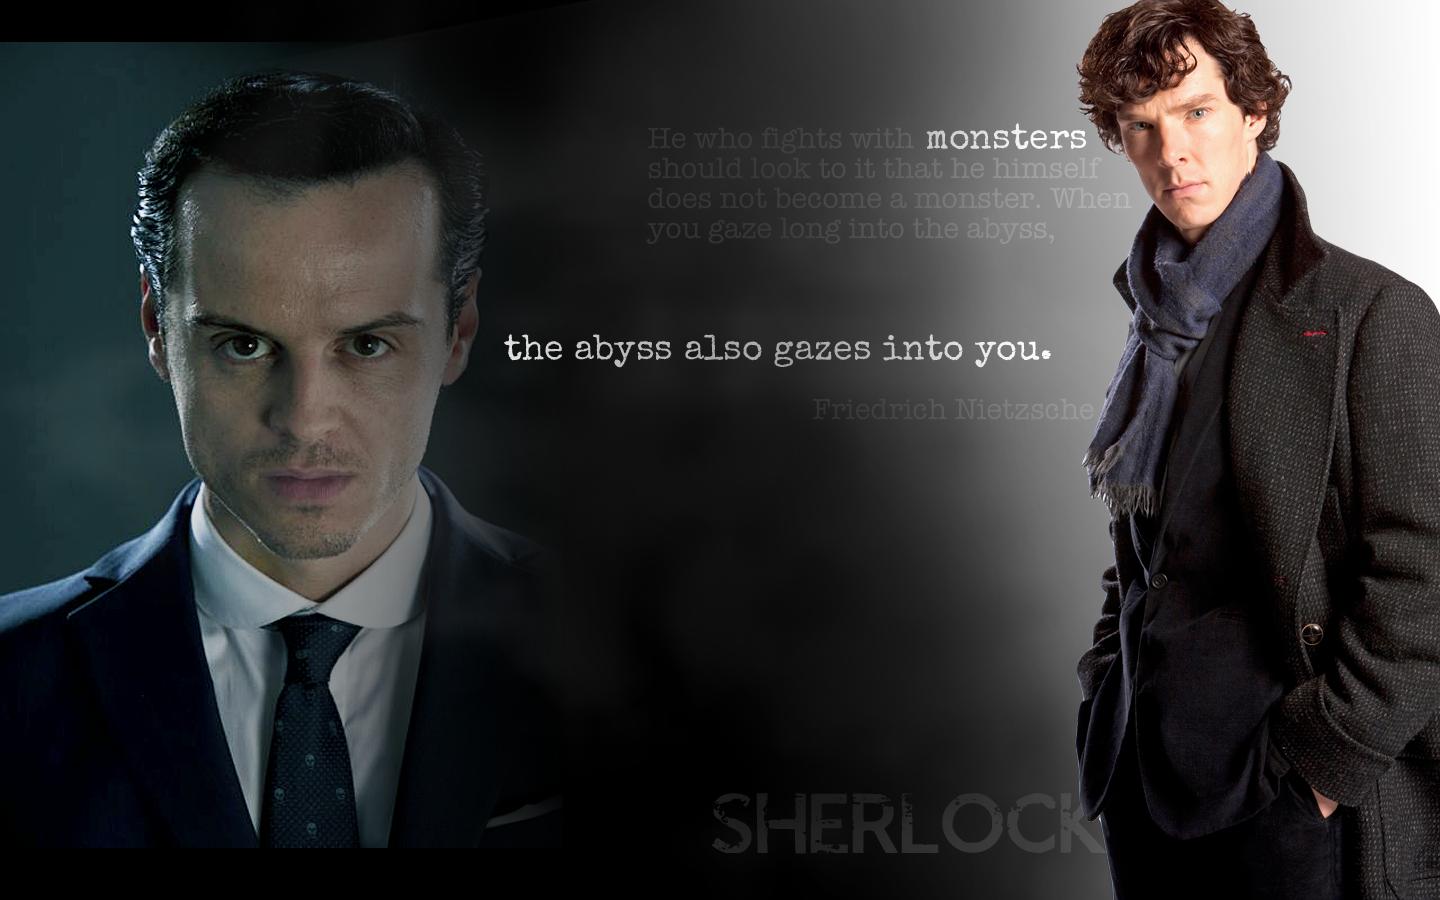 Sherlock Moriarty Wallpaper Image & Picture. I am SHER